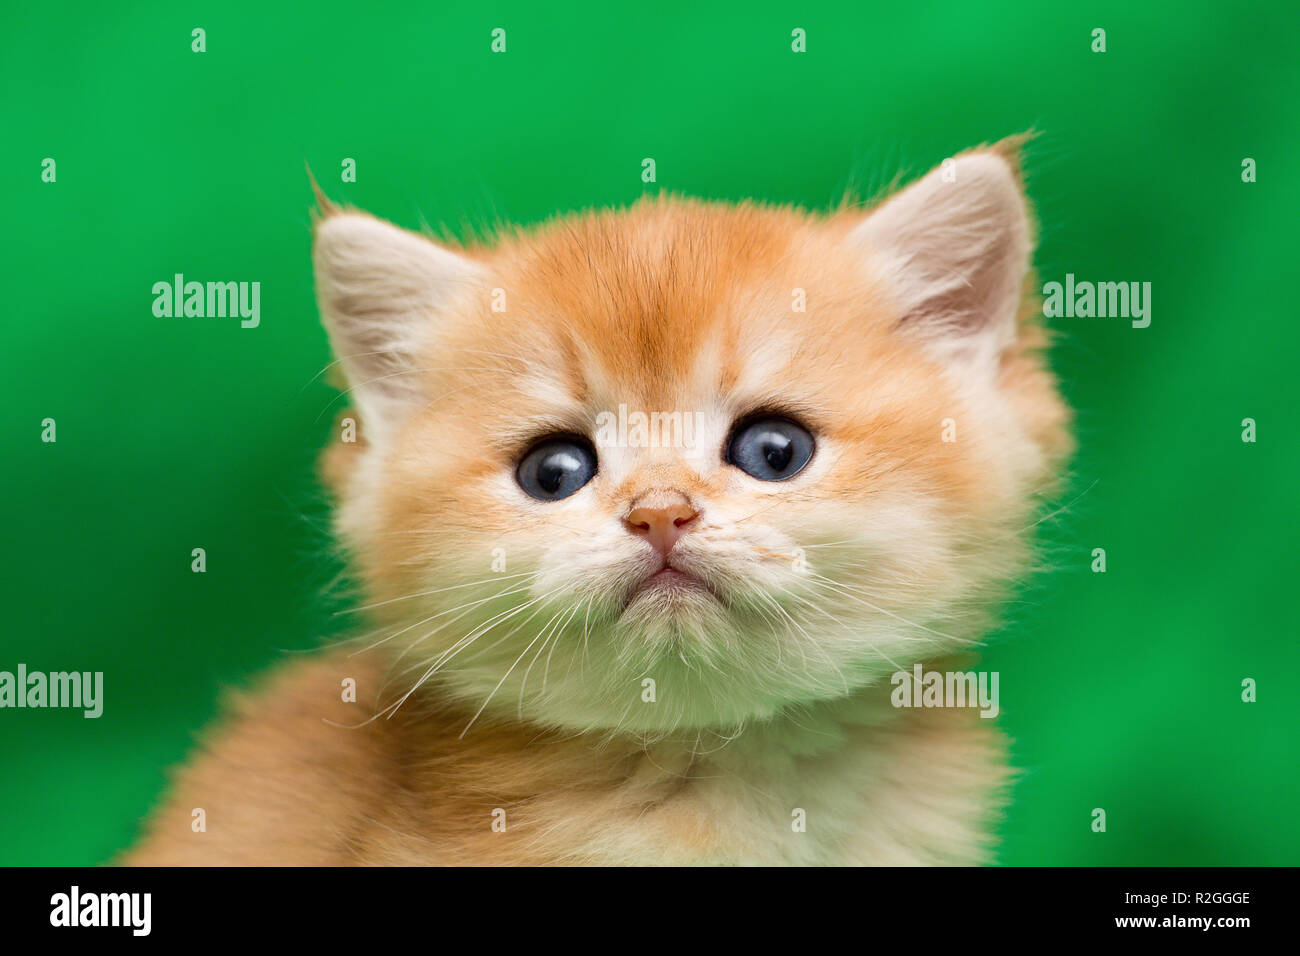 Portrait of a charming little Golden British kitten close-up, the kitten looks into the camera, the head of a British kitten close-up Stock Photo